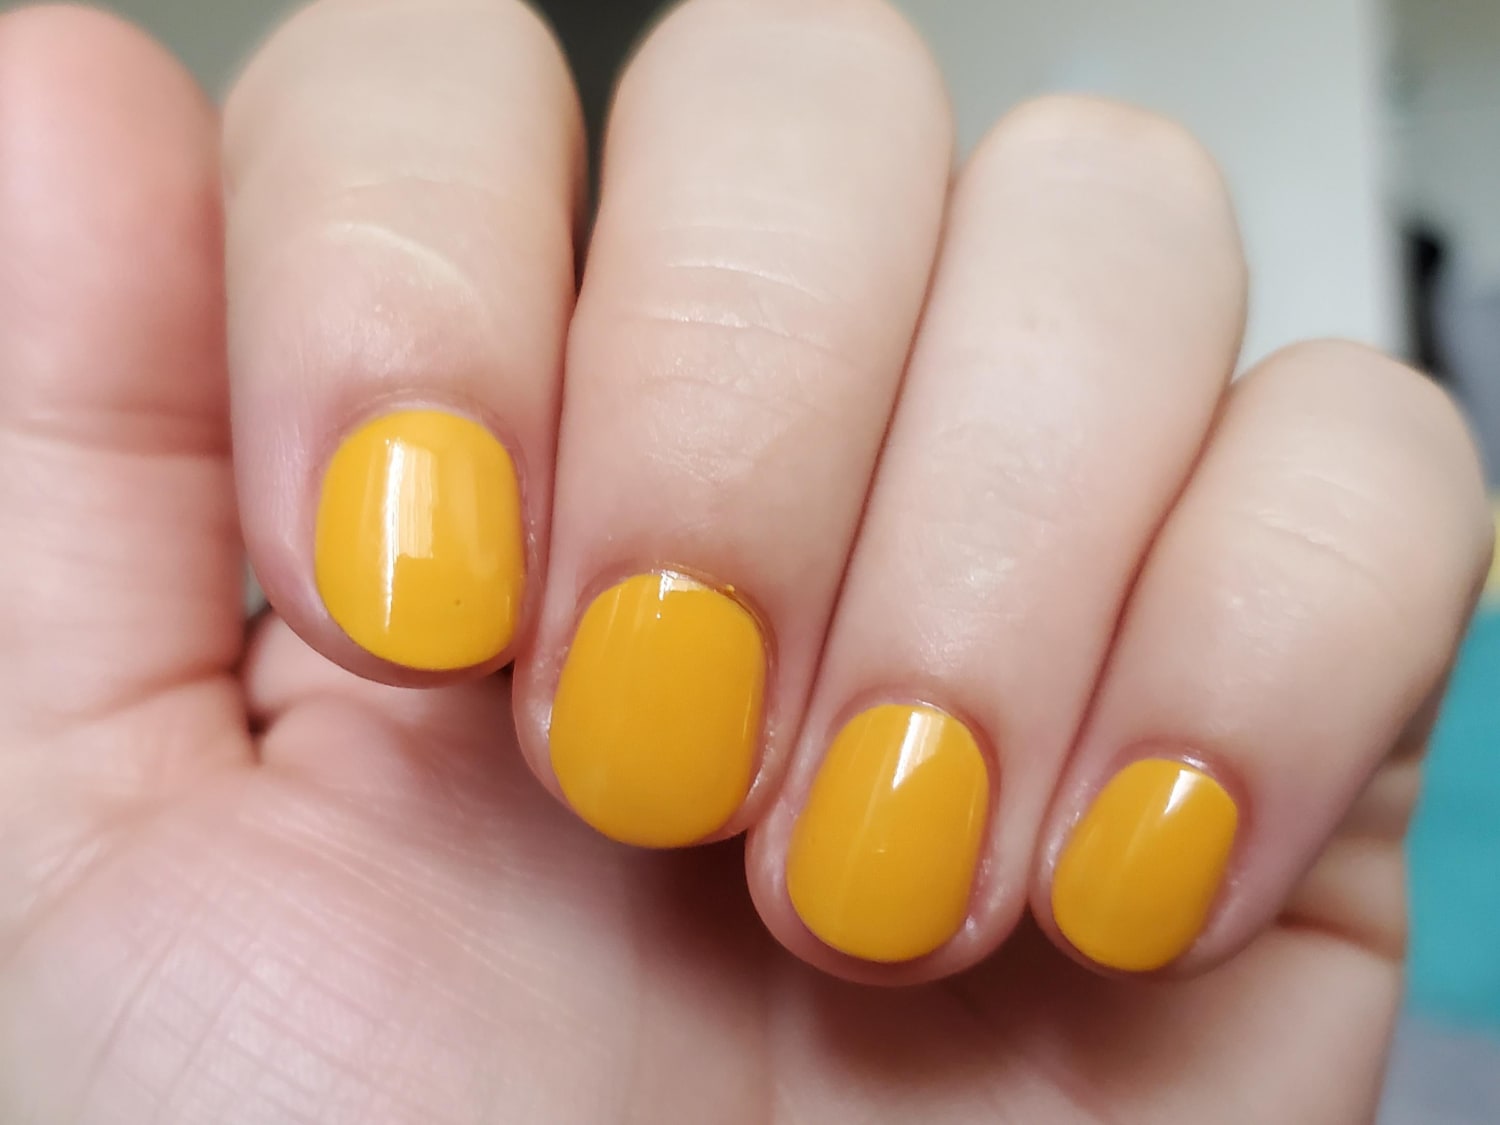 I usually hate how yellow looks on my skin tone, but I'm obsessed with this one!